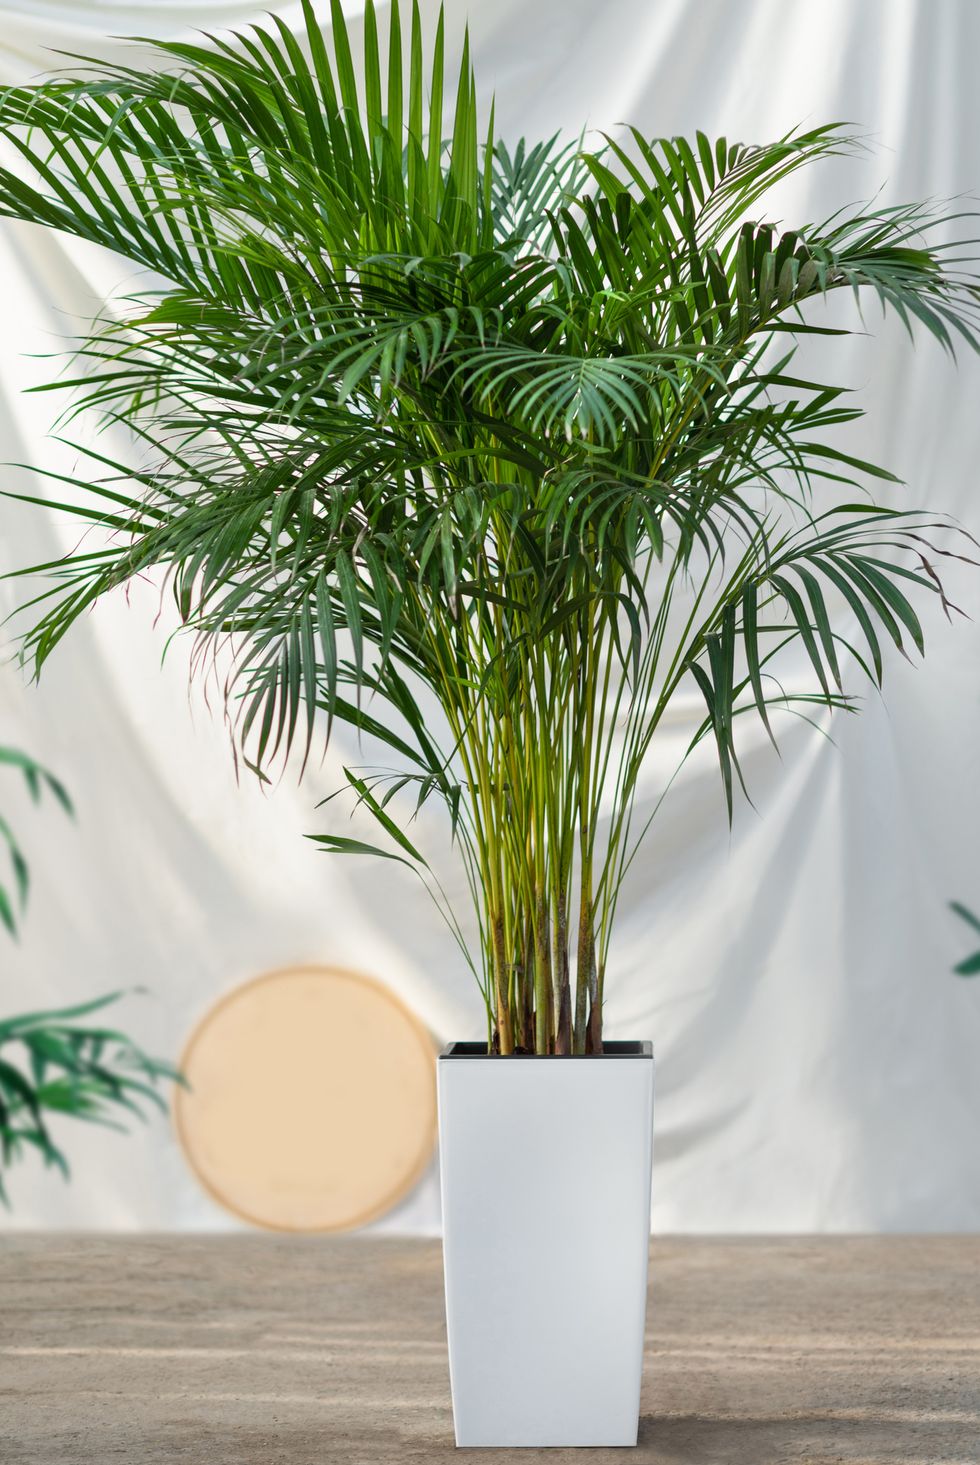 dypsis lutescens, areca cane, golden cane palm plant in white pot